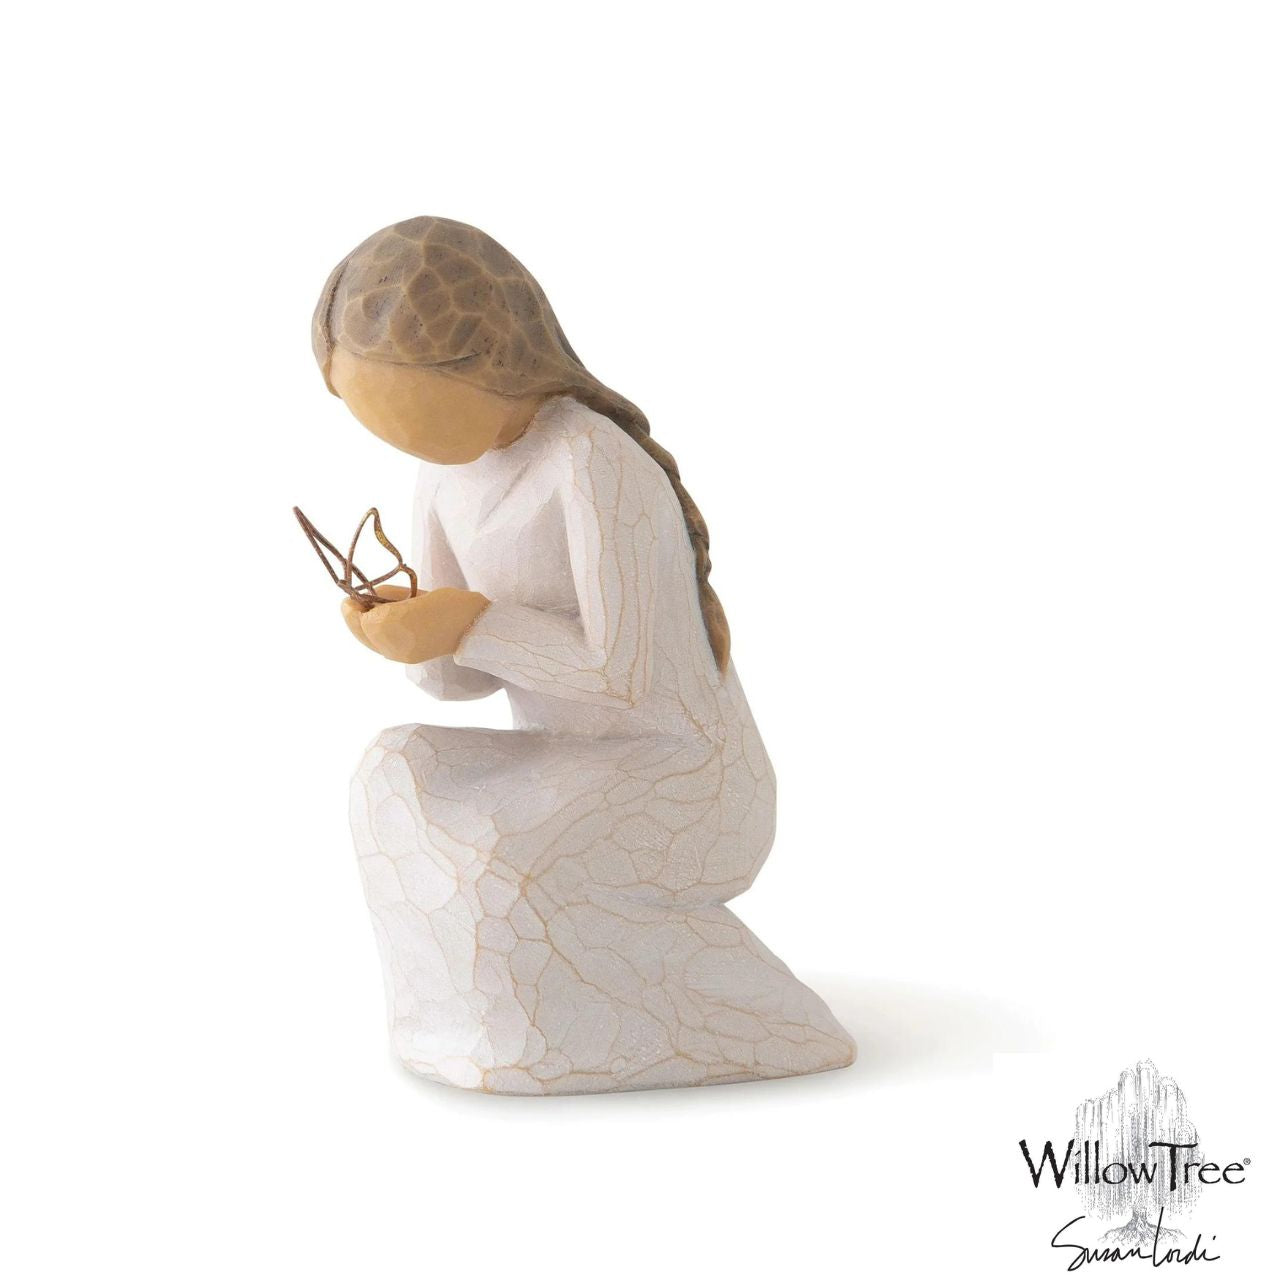 Quiet Wonder by Willow Tree  This figure includes a gift tag with the sentiment 'May quiet wonders bring you hope' This figure can be a little reminder to yourself, or someone close to you, of revelations and discoveries found in quiet moments when we are still and present.